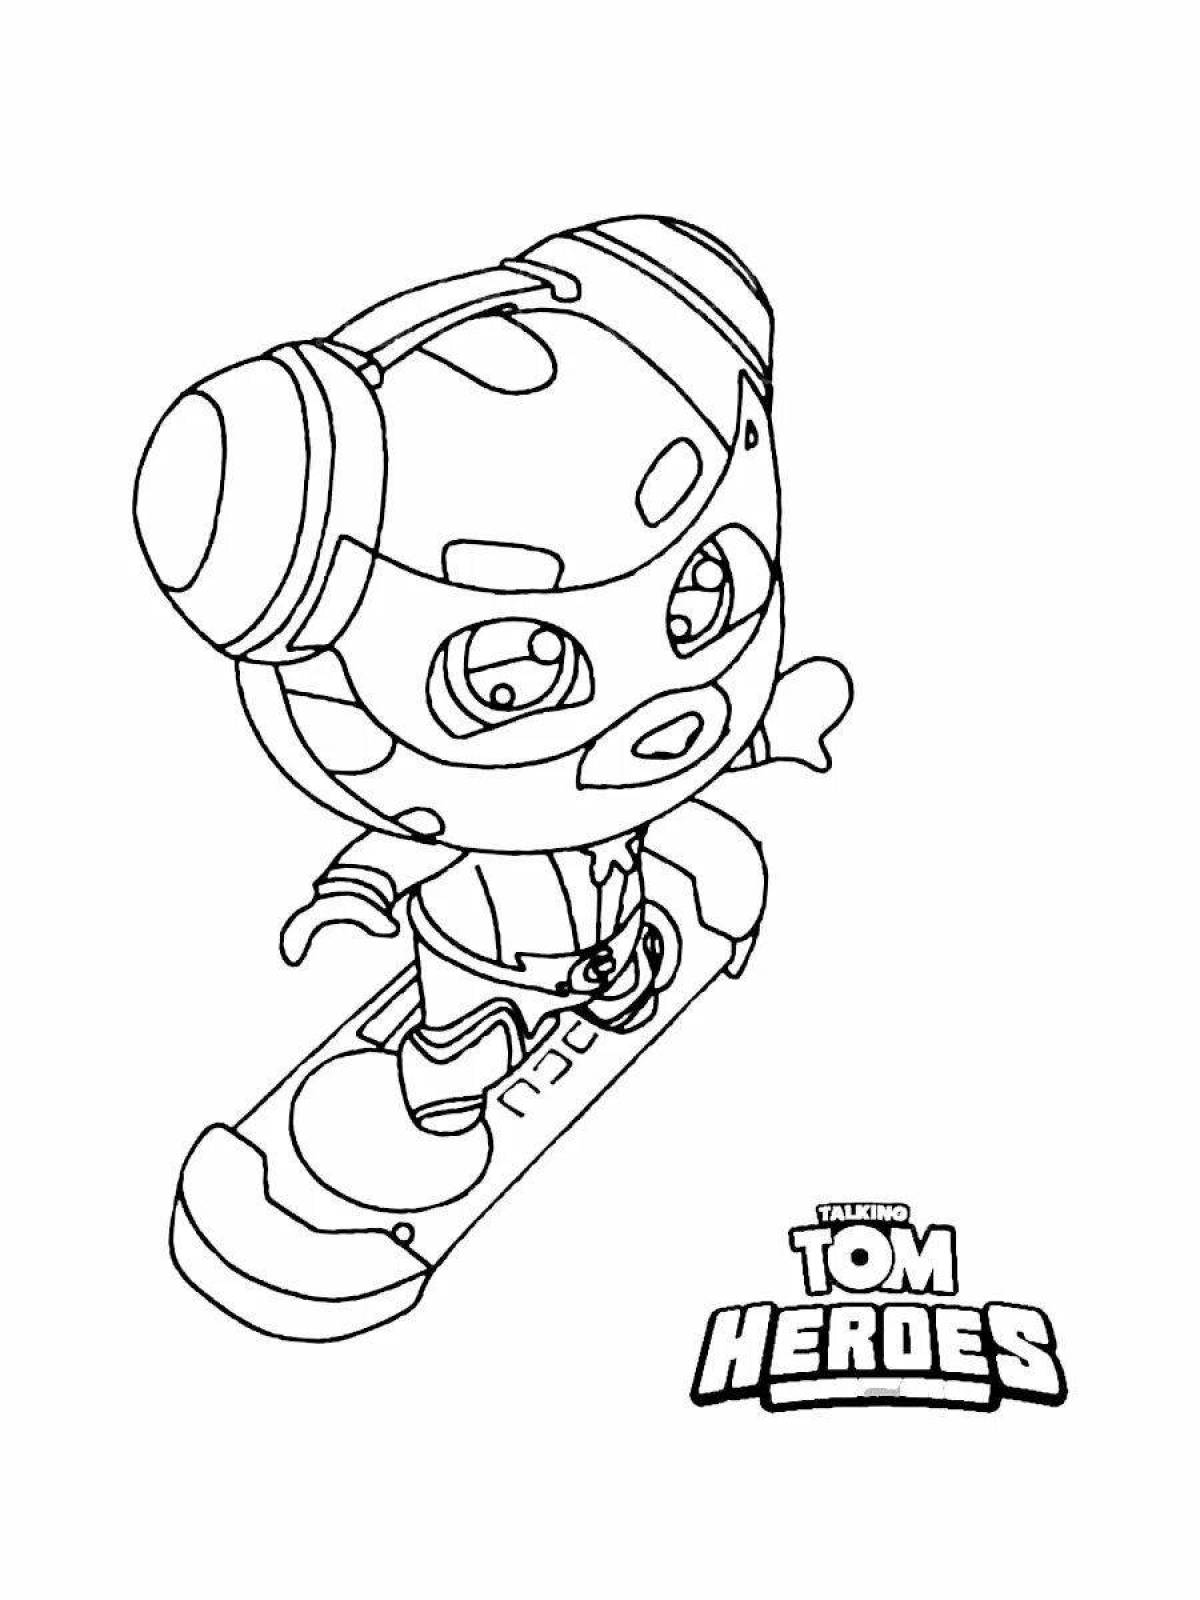 Color-zany talking tom hero coloring page